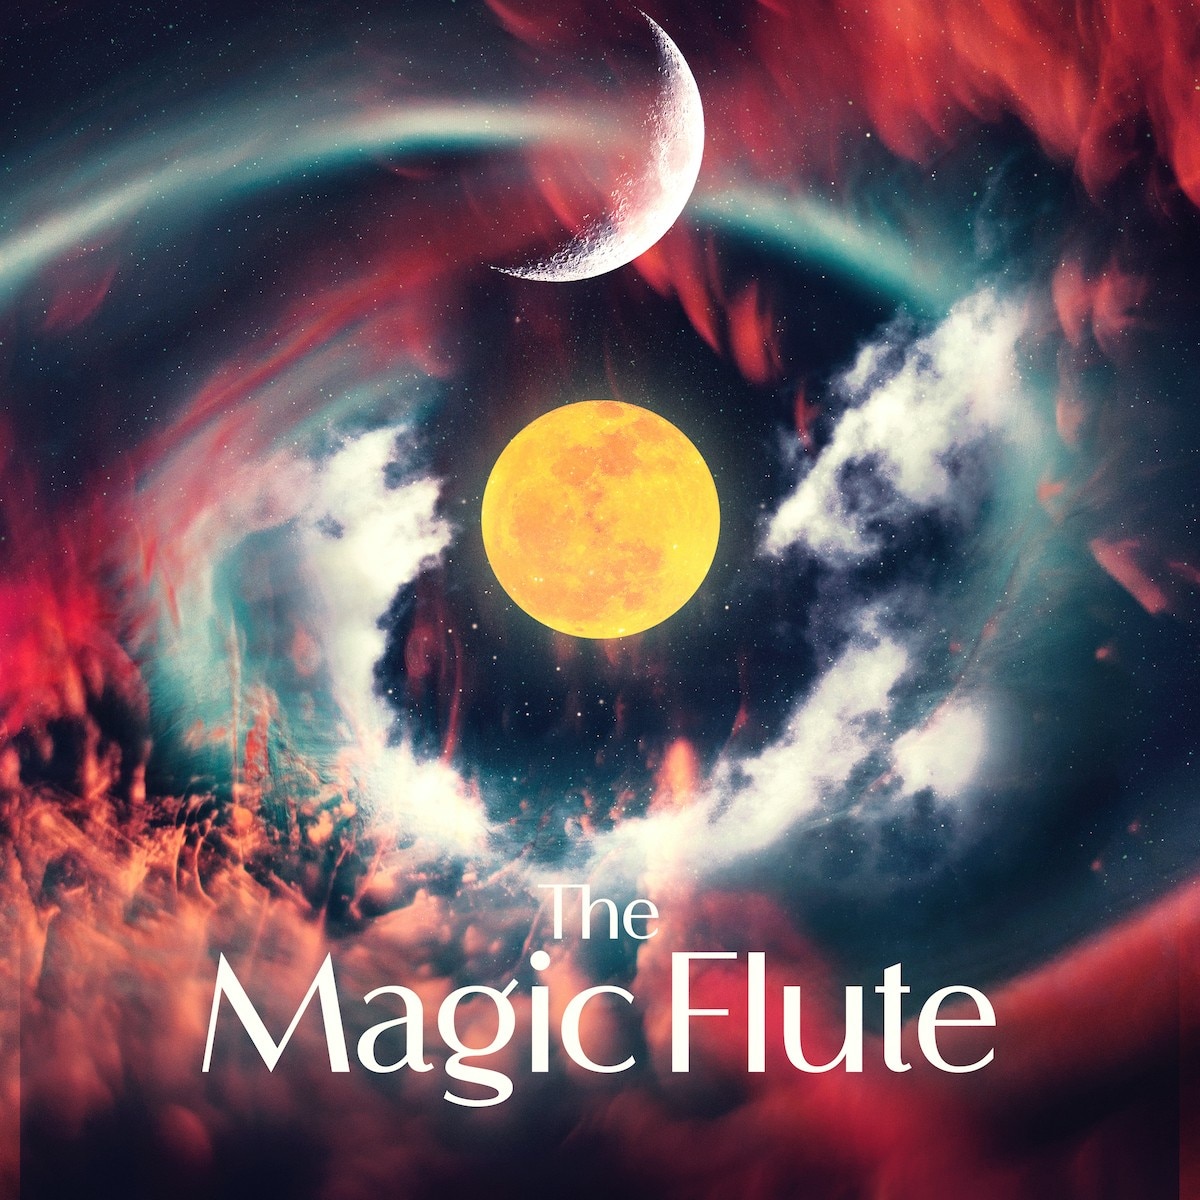 Text: The Magic Flute, Image: the sun and moon are pictured in a hazy starscape